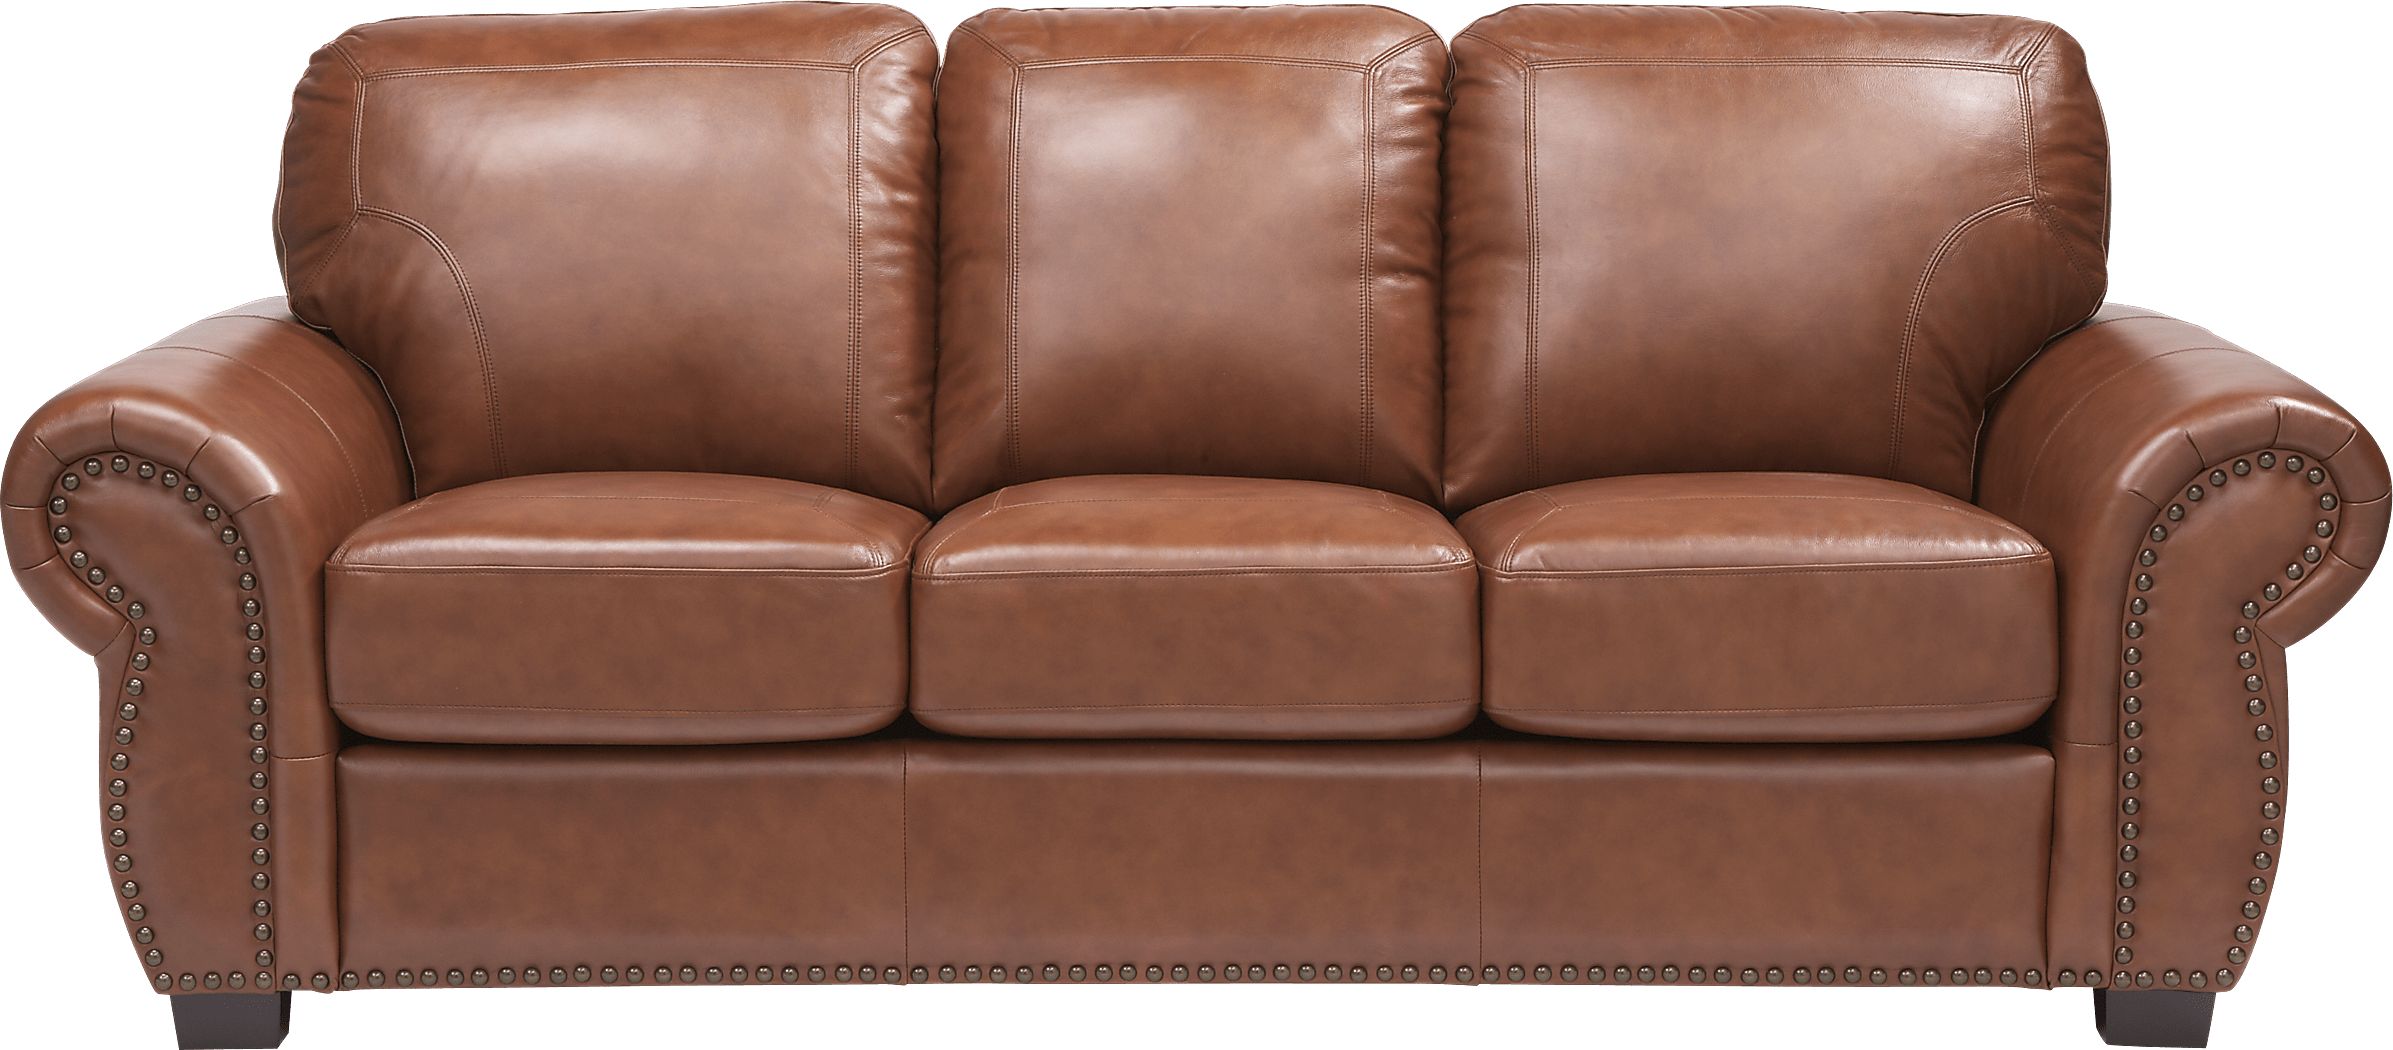 Light Brown Leather Sofa - Rooms To Go